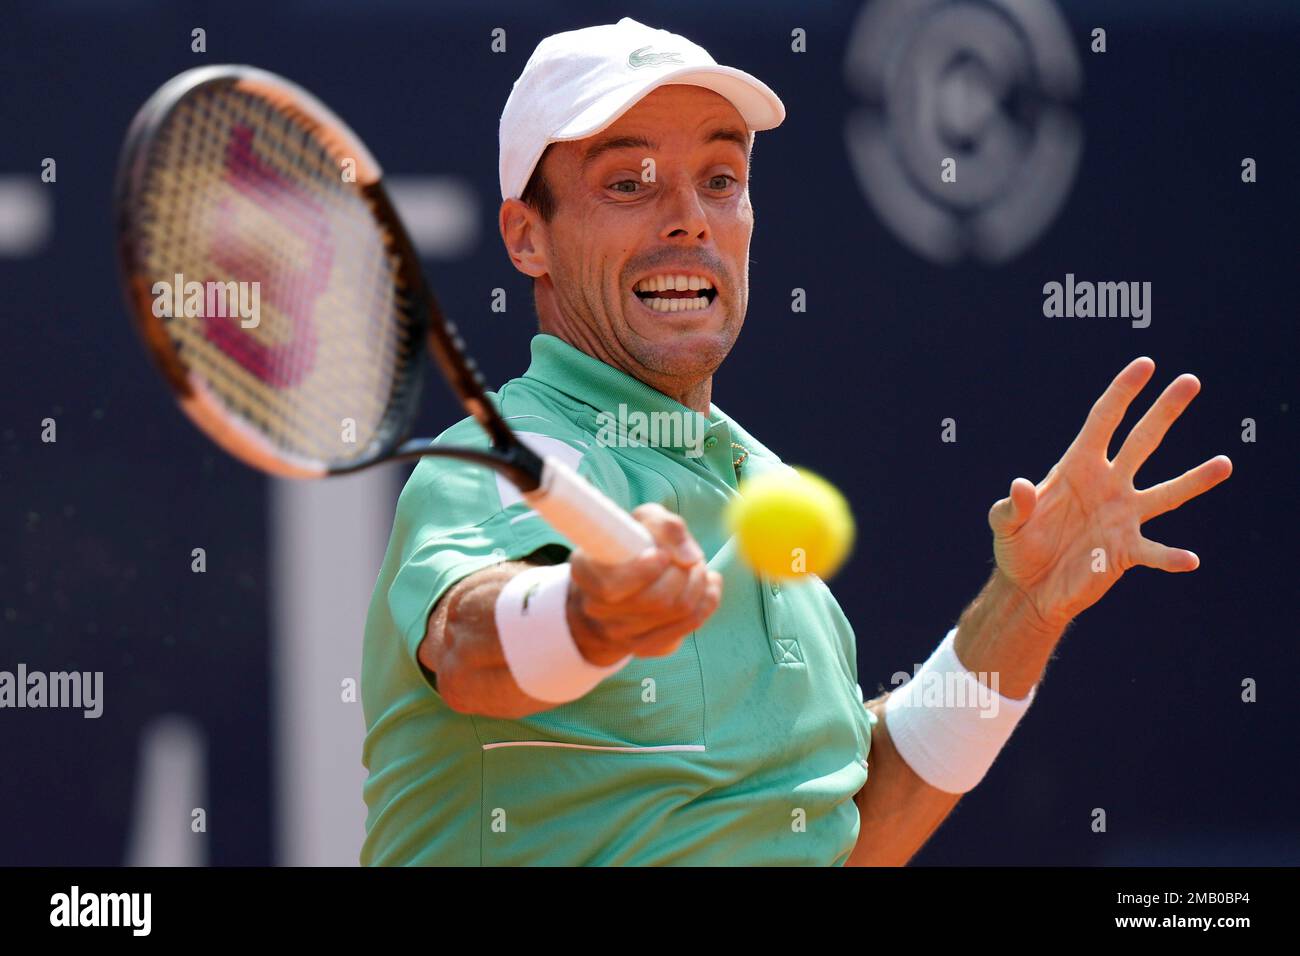 Austrias Filip Misolic returns the ball to Germanys Yannick Hanfmann during the semifinal match at the Generali Open tennis tournament in Kitzbuehel, Austria, Saturday, July 30, 2022